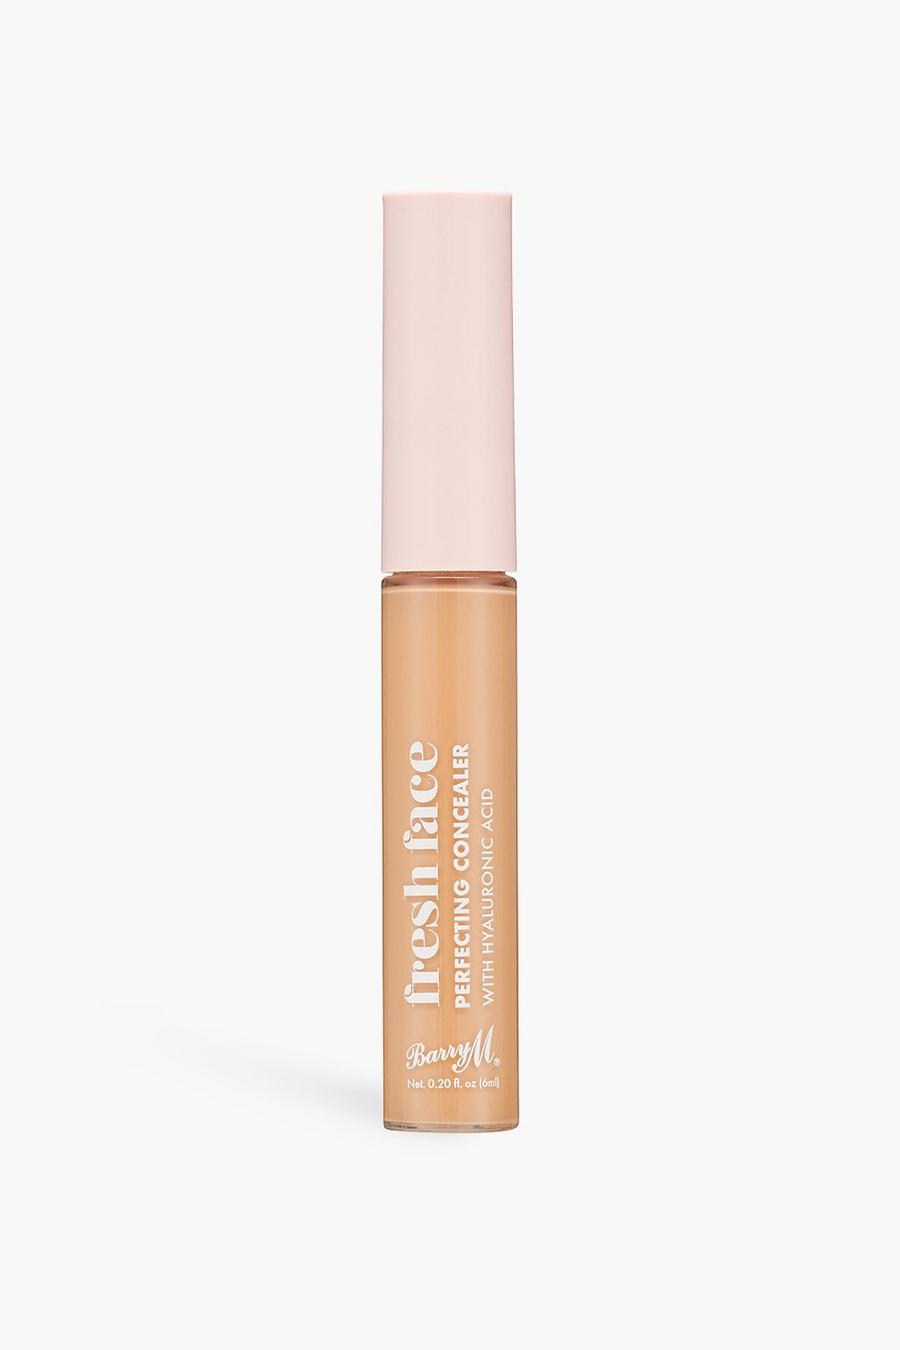 Tan marron Barry M Fresh Face Perfecting Concealer 7